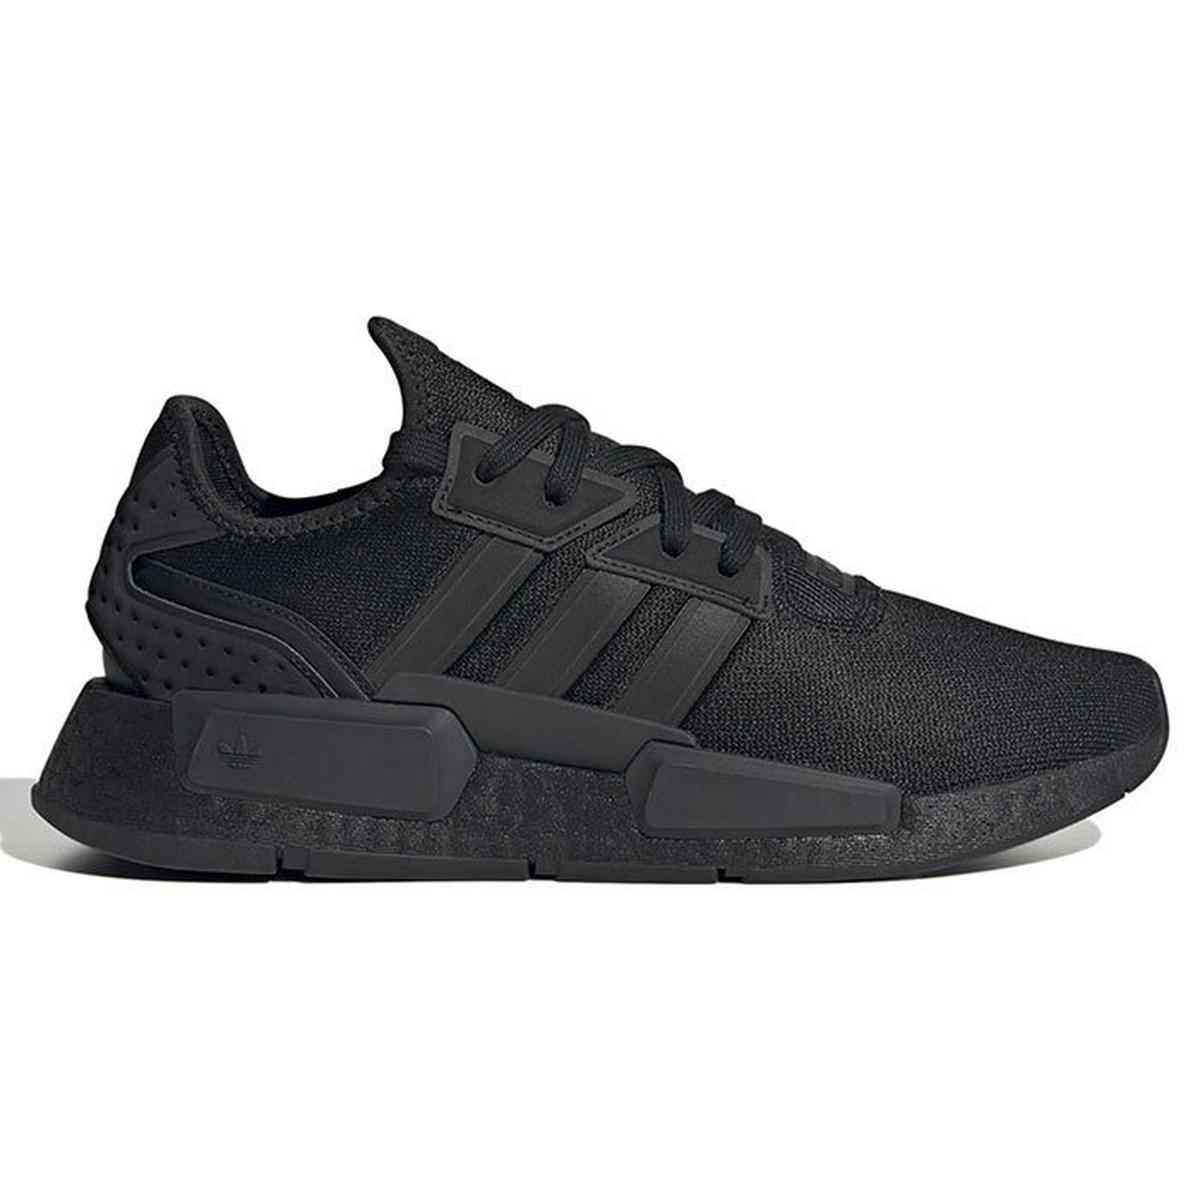 Chaussures NMD_G1 pour hommes